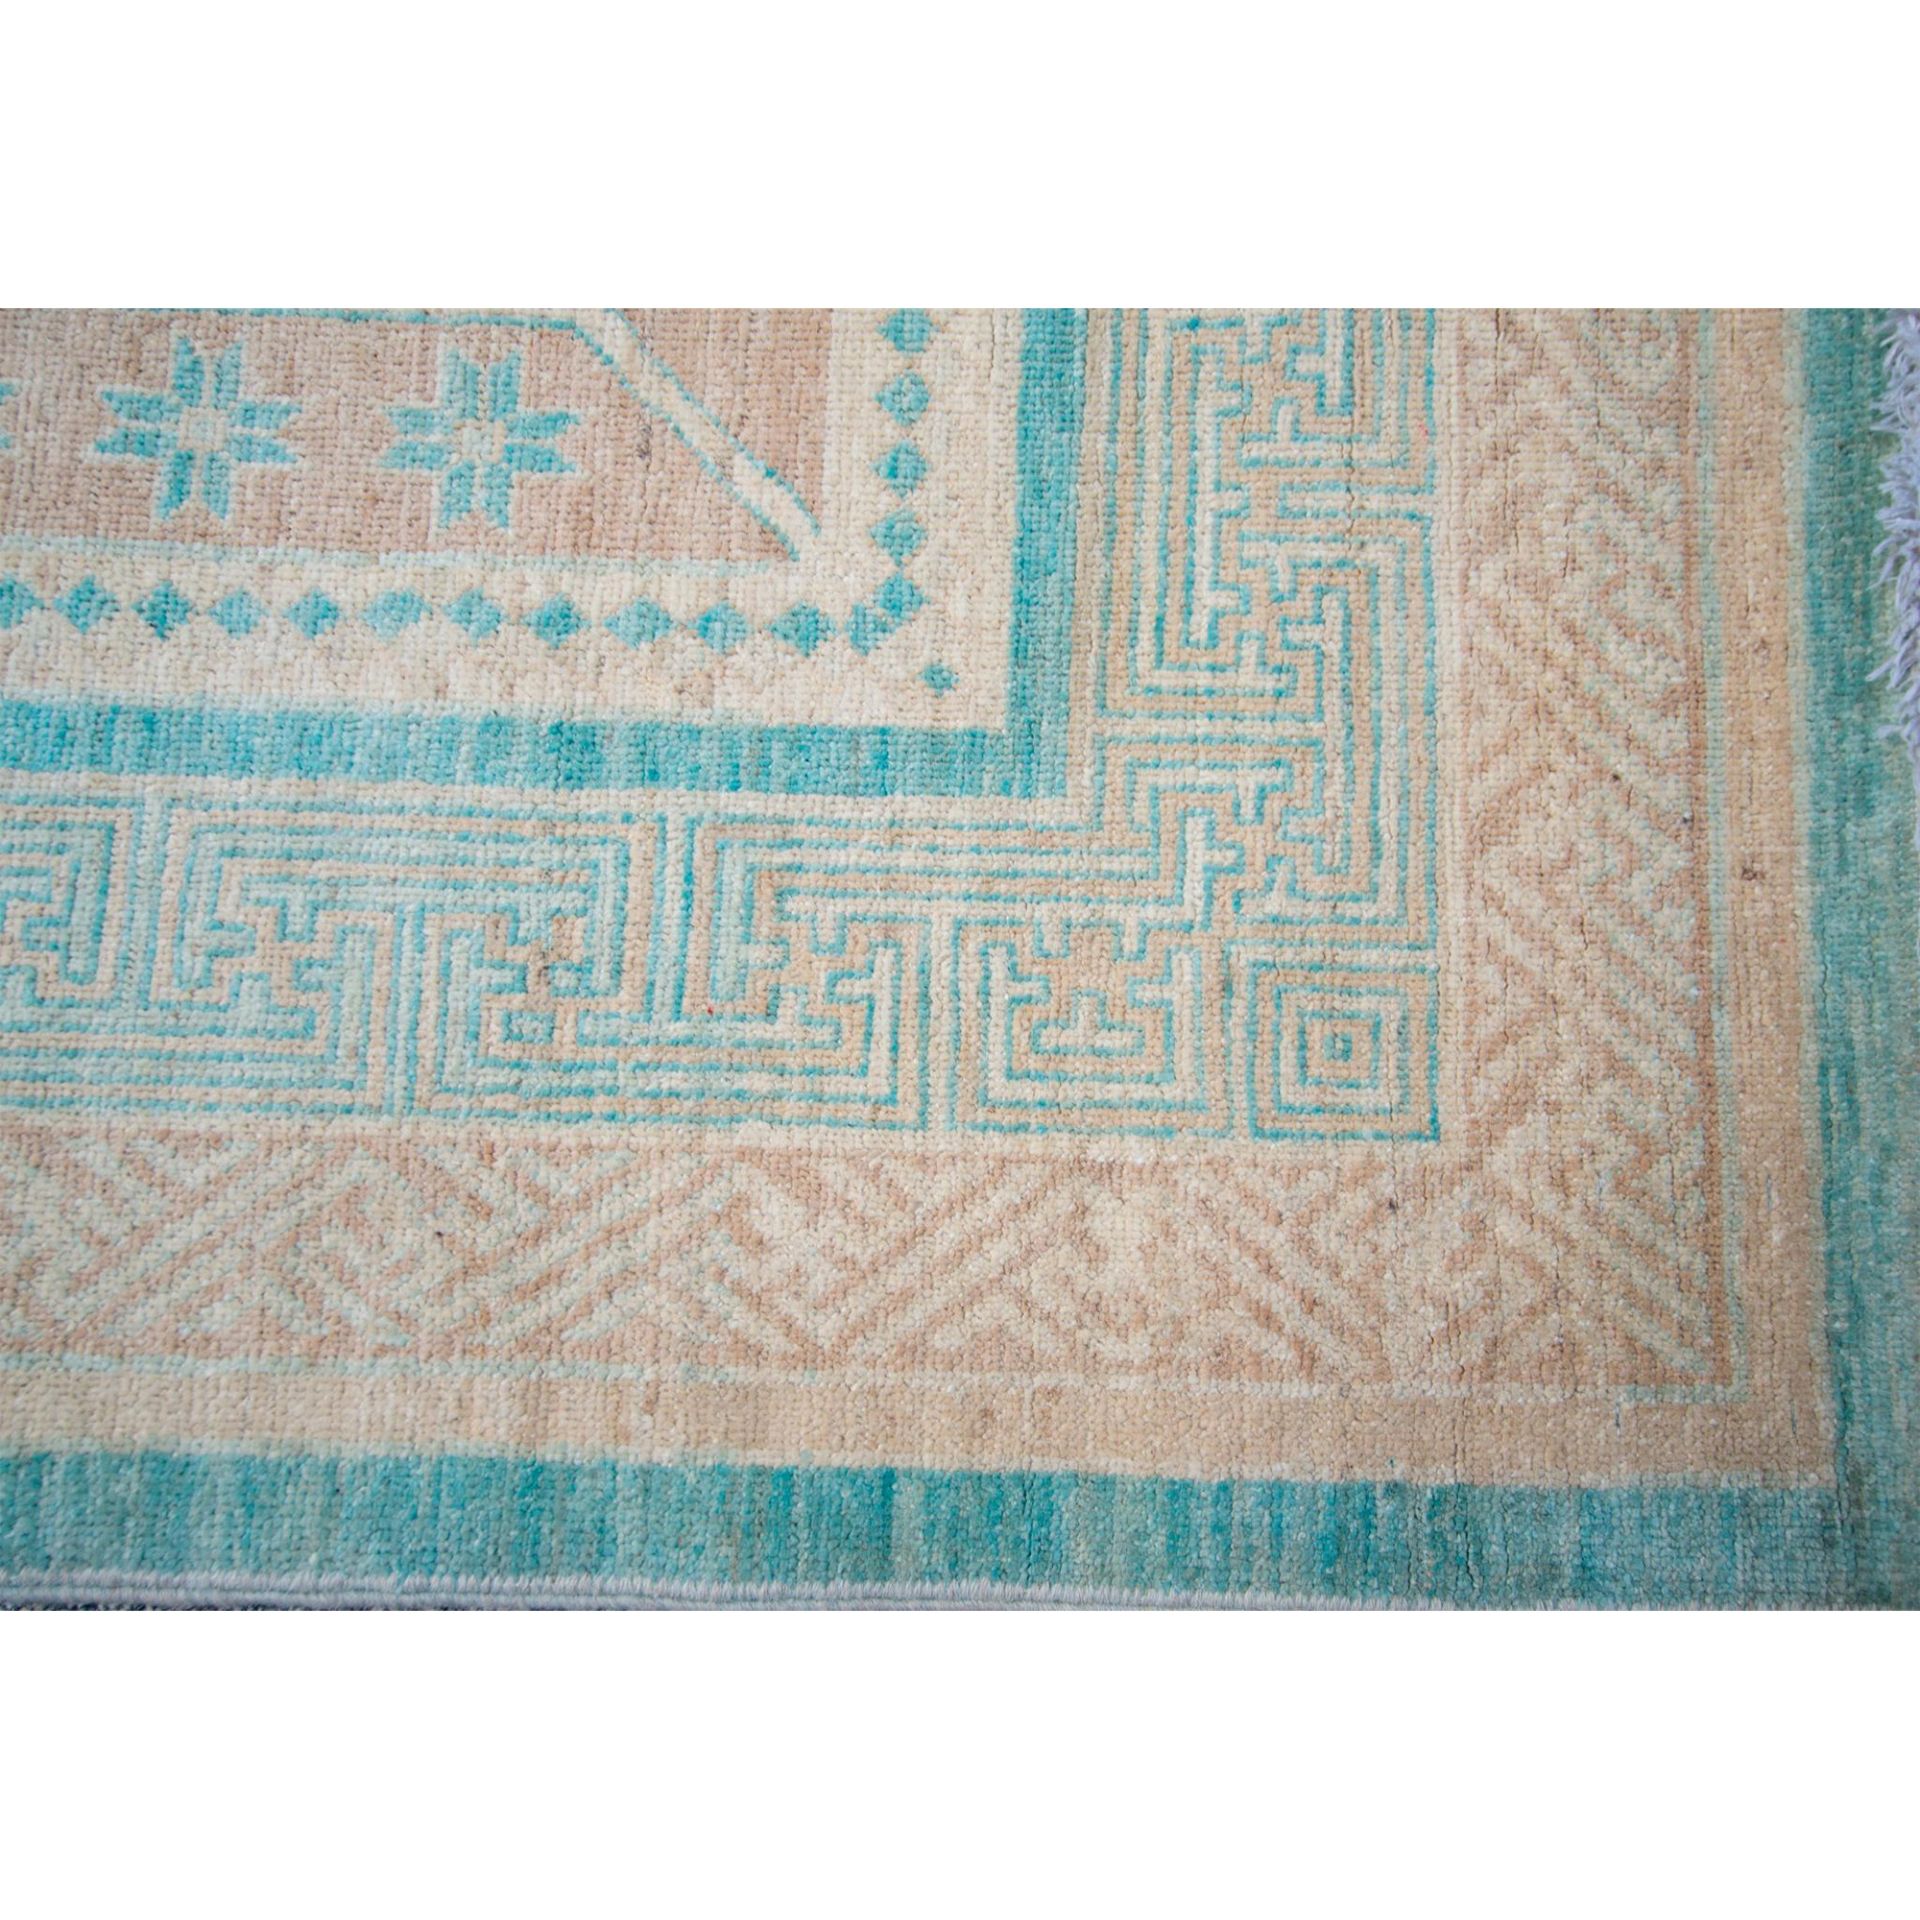 Middle Eastern 100-Percent Hand Woven Wool Rug - Image 2 of 7